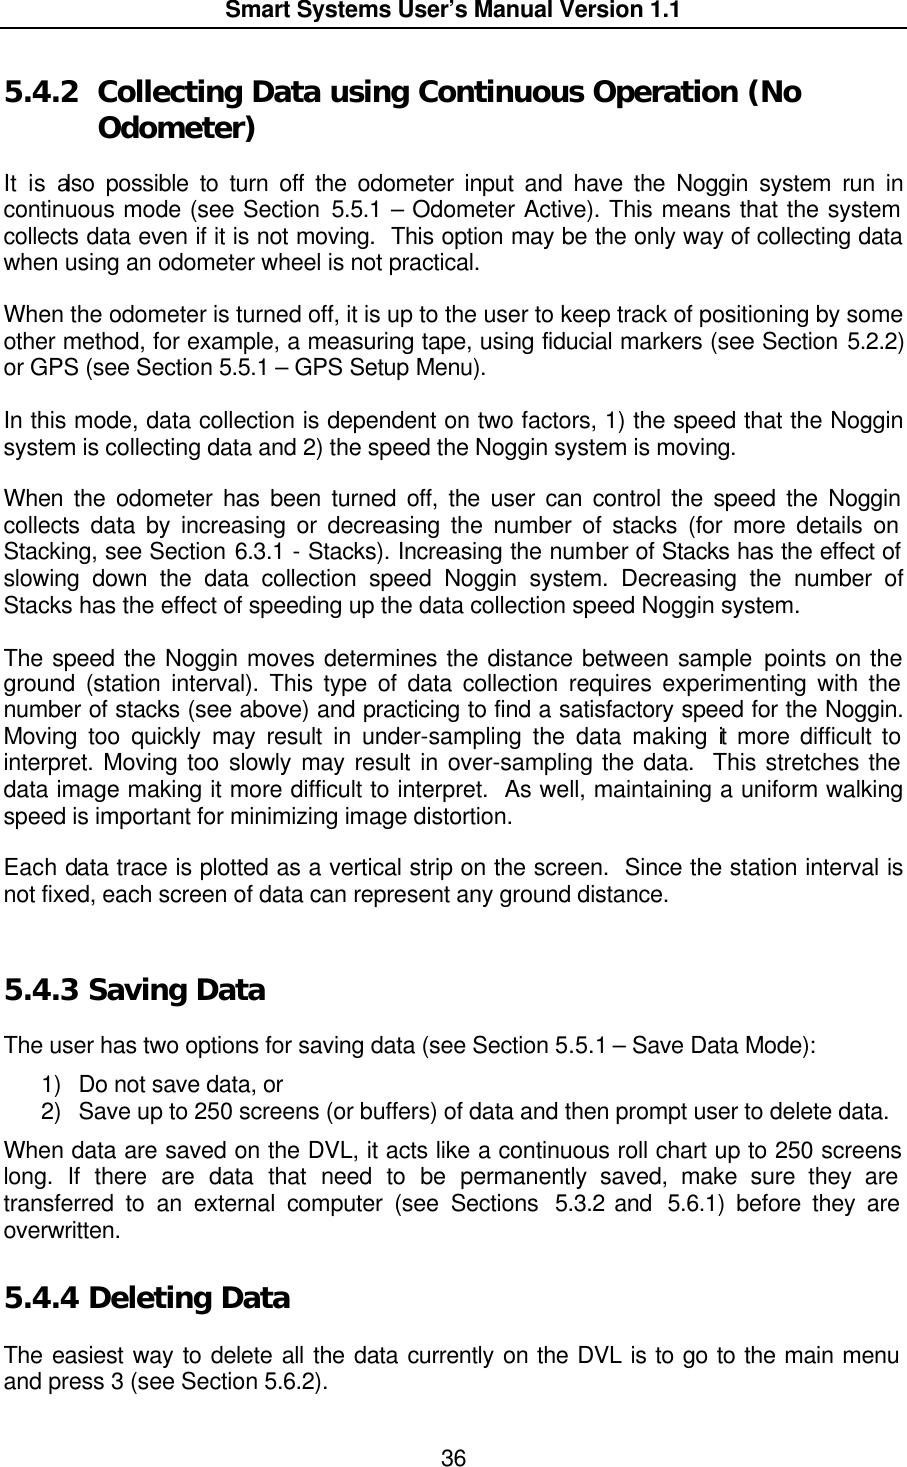  Smart Systems User’s Manual Version 1.1  36  5.4.2  Collecting Data using Continuous Operation (No Odometer)  It is also possible to turn off the odometer input and have the Noggin system run in continuous mode (see Section 5.5.1 – Odometer Active). This means that the system collects data even if it is not moving.  This option may be the only way of collecting data when using an odometer wheel is not practical.  When the odometer is turned off, it is up to the user to keep track of positioning by some other method, for example, a measuring tape, using fiducial markers (see Section 5.2.2) or GPS (see Section 5.5.1 – GPS Setup Menu).  In this mode, data collection is dependent on two factors, 1) the speed that the Noggin system is collecting data and 2) the speed the Noggin system is moving.  When the odometer has been turned off, the user can control the speed the Noggin collects data by increasing or decreasing the number of stacks (for more details on Stacking, see Section 6.3.1 - Stacks). Increasing the number of Stacks has the effect of slowing down the data collection speed Noggin system. Decreasing the number of Stacks has the effect of speeding up the data collection speed Noggin system.  The speed the Noggin moves determines the distance between sample points on the ground (station interval). This type of data collection requires experimenting with the number of stacks (see above) and practicing to find a satisfactory speed for the Noggin. Moving too quickly may result in under-sampling the data making it more difficult to interpret. Moving too slowly may result in over-sampling the data.  This stretches the data image making it more difficult to interpret.  As well, maintaining a uniform walking speed is important for minimizing image distortion.  Each data trace is plotted as a vertical strip on the screen.  Since the station interval is not fixed, each screen of data can represent any ground distance.   5.4.3  Saving Data  The user has two options for saving data (see Section 5.5.1 – Save Data Mode):  1) Do not save data, or  2) Save up to 250 screens (or buffers) of data and then prompt user to delete data. When data are saved on the DVL, it acts like a continuous roll chart up to 250 screens long. If there are data that need to be permanently saved, make sure they are transferred to an external computer (see Sections  5.3.2 and  5.6.1) before they are overwritten.  5.4.4  Deleting Data  The easiest way to delete all the data currently on the DVL is to go to the main menu and press 3 (see Section 5.6.2).  